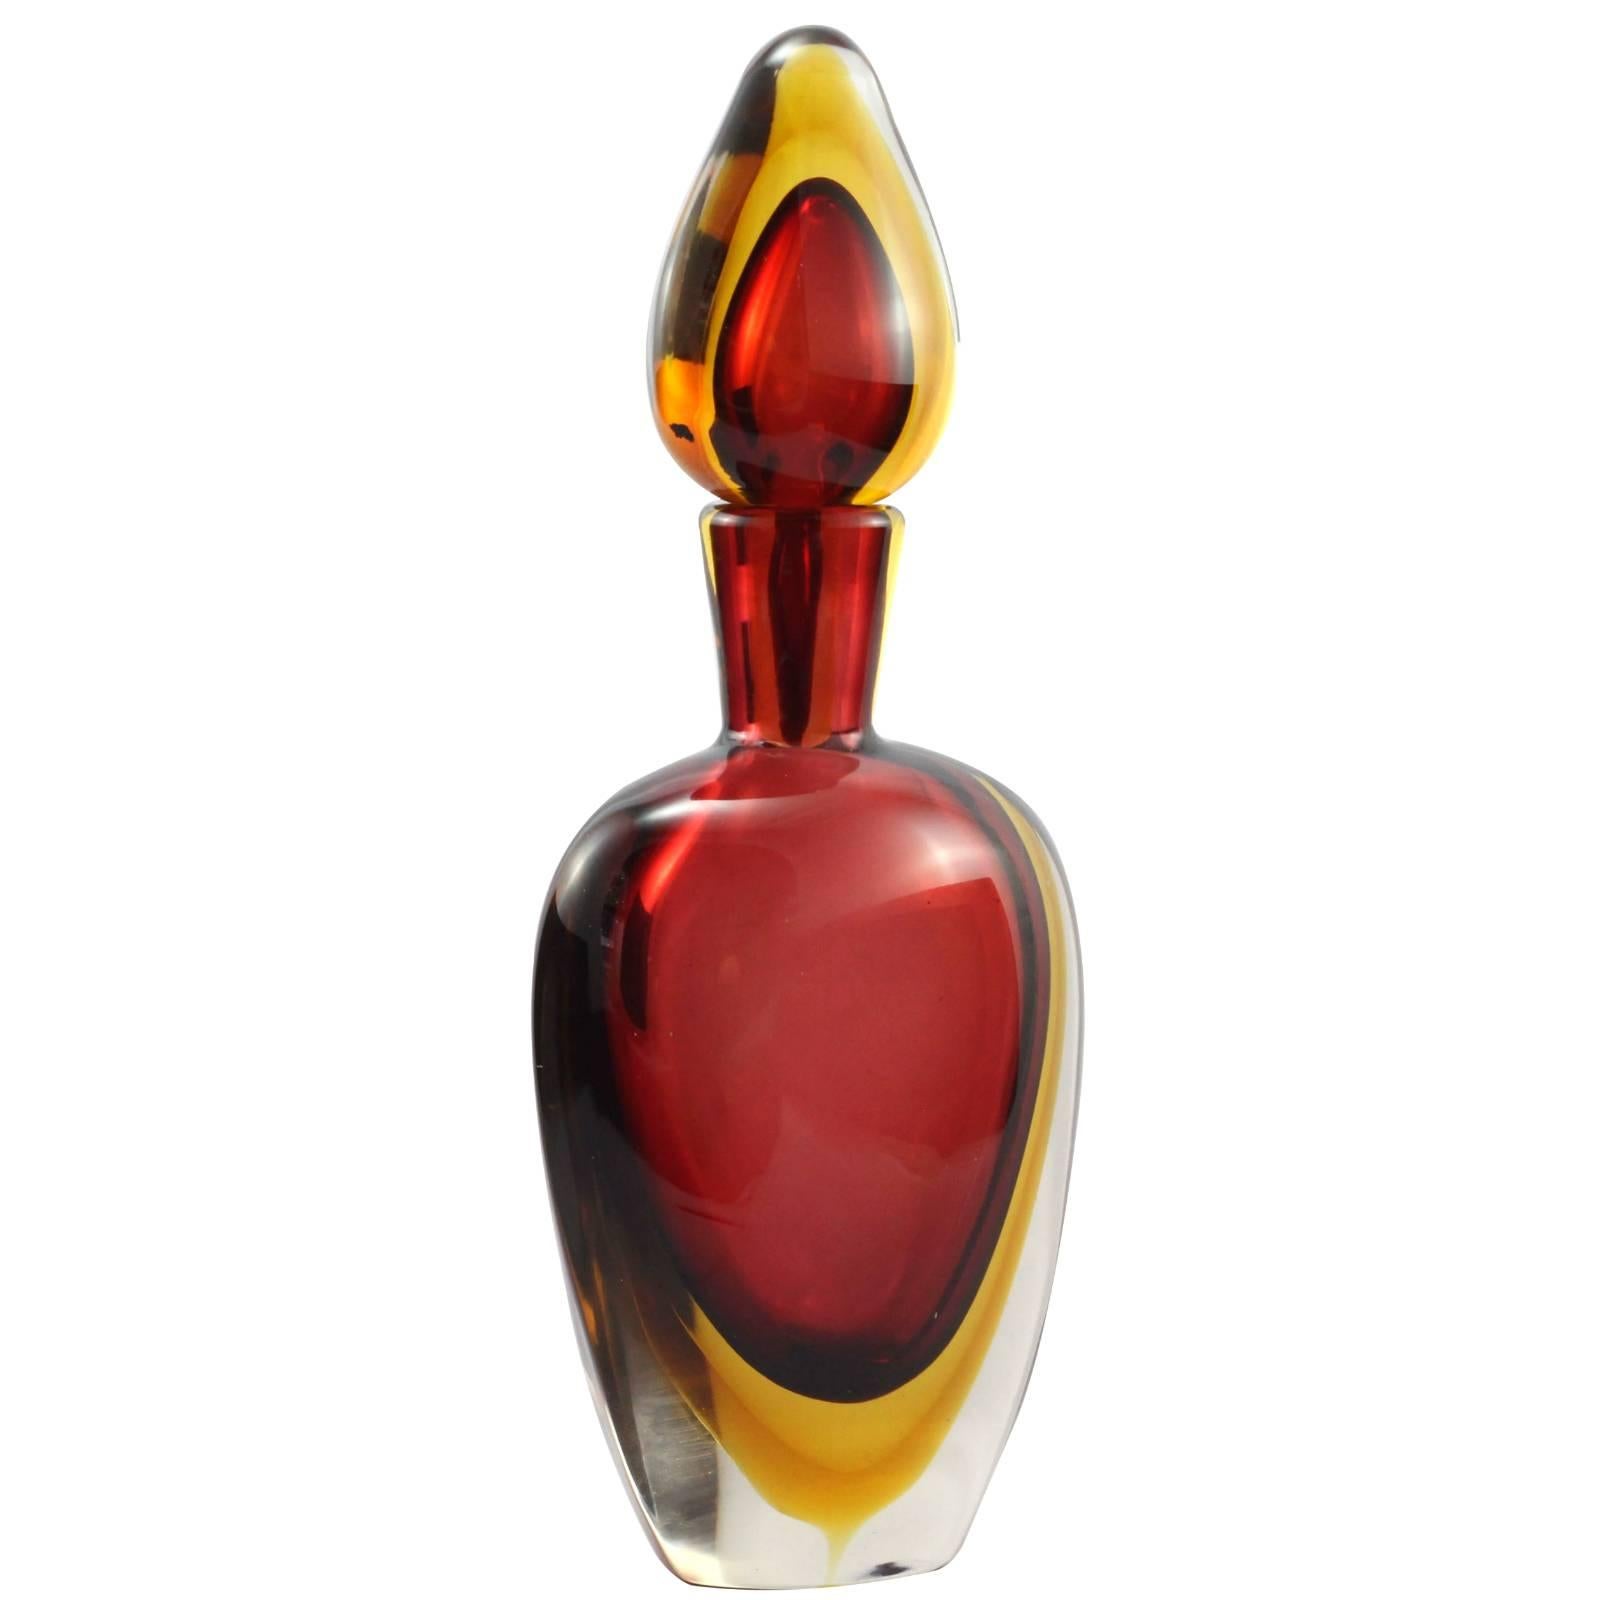 A vintage 20th century red and yellow Murano Sommerso glass decanter attributed to Flavio Poli for Seguso.